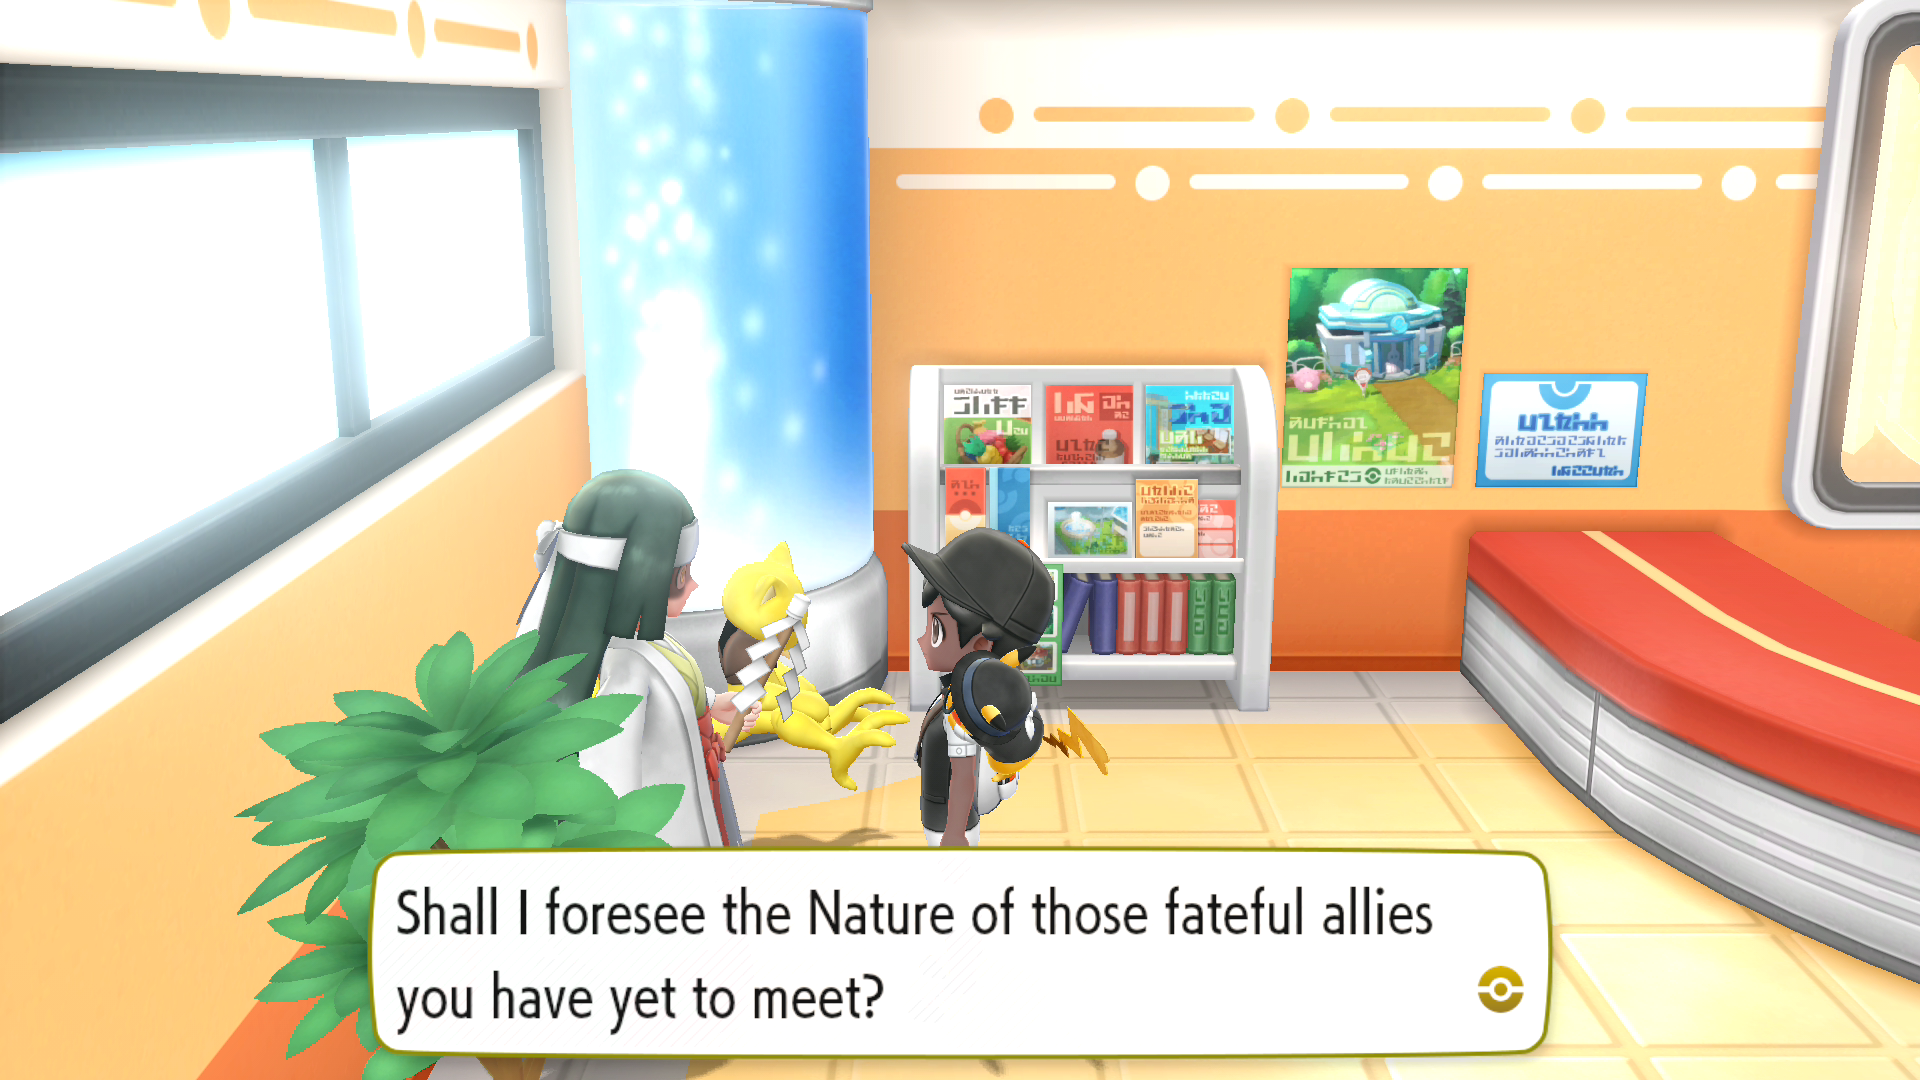 Enrich Shredded Raffinere Pokemon Let's Go Fortune Teller guide: how to use the nature lady to  influence Pokemon natures | VG247